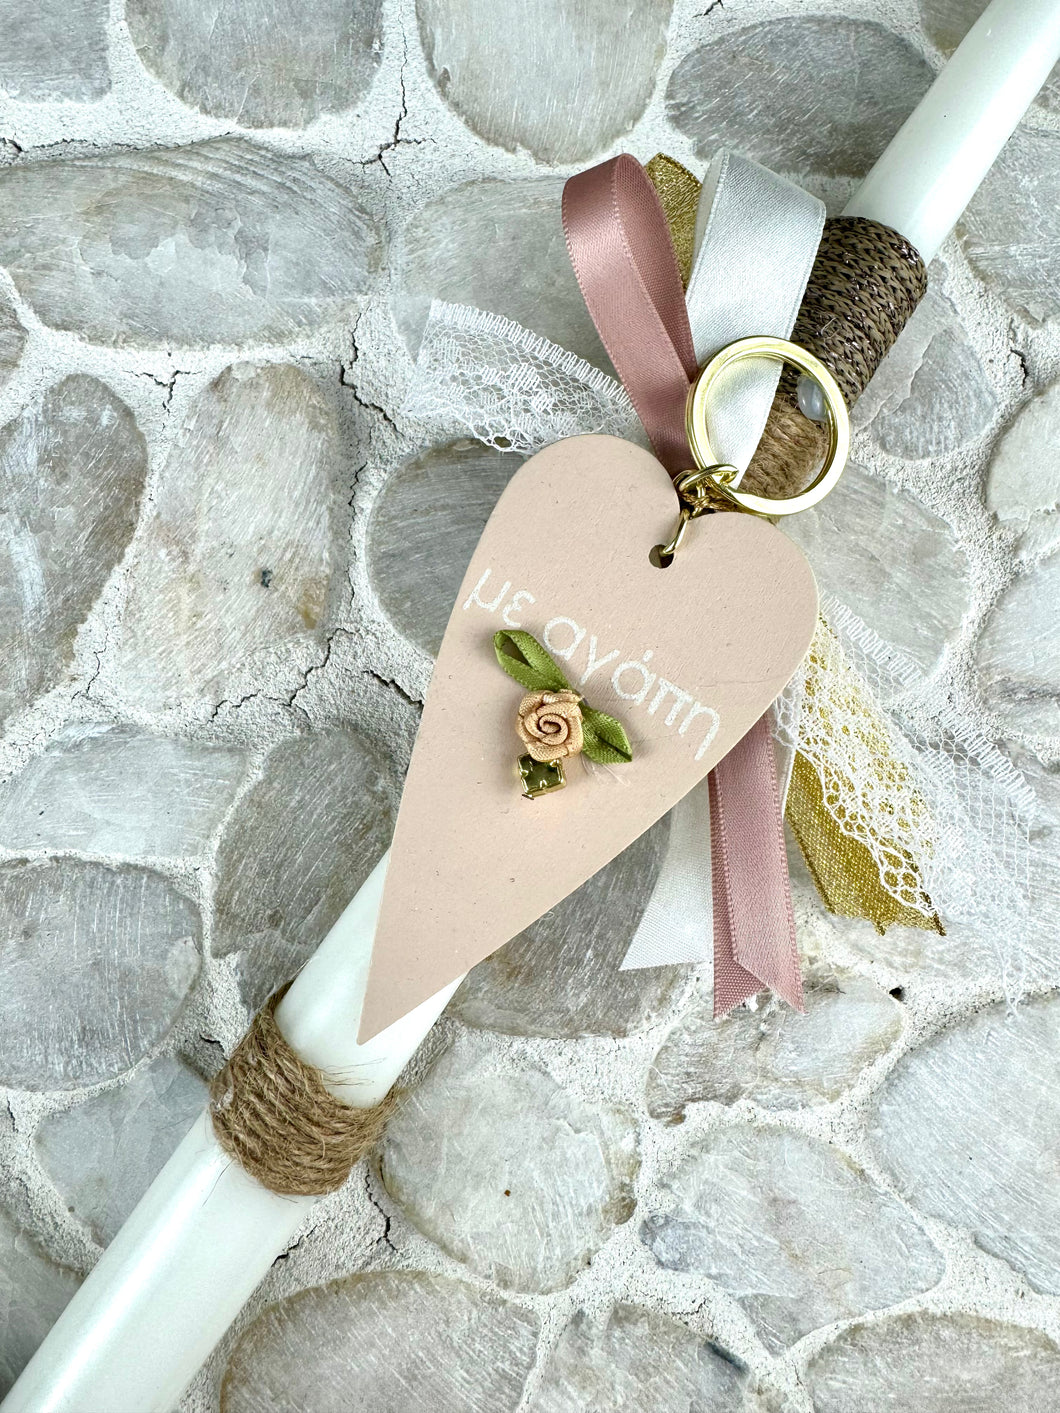 Corded Easter Candle with Wooden Heart Keychain RC202448